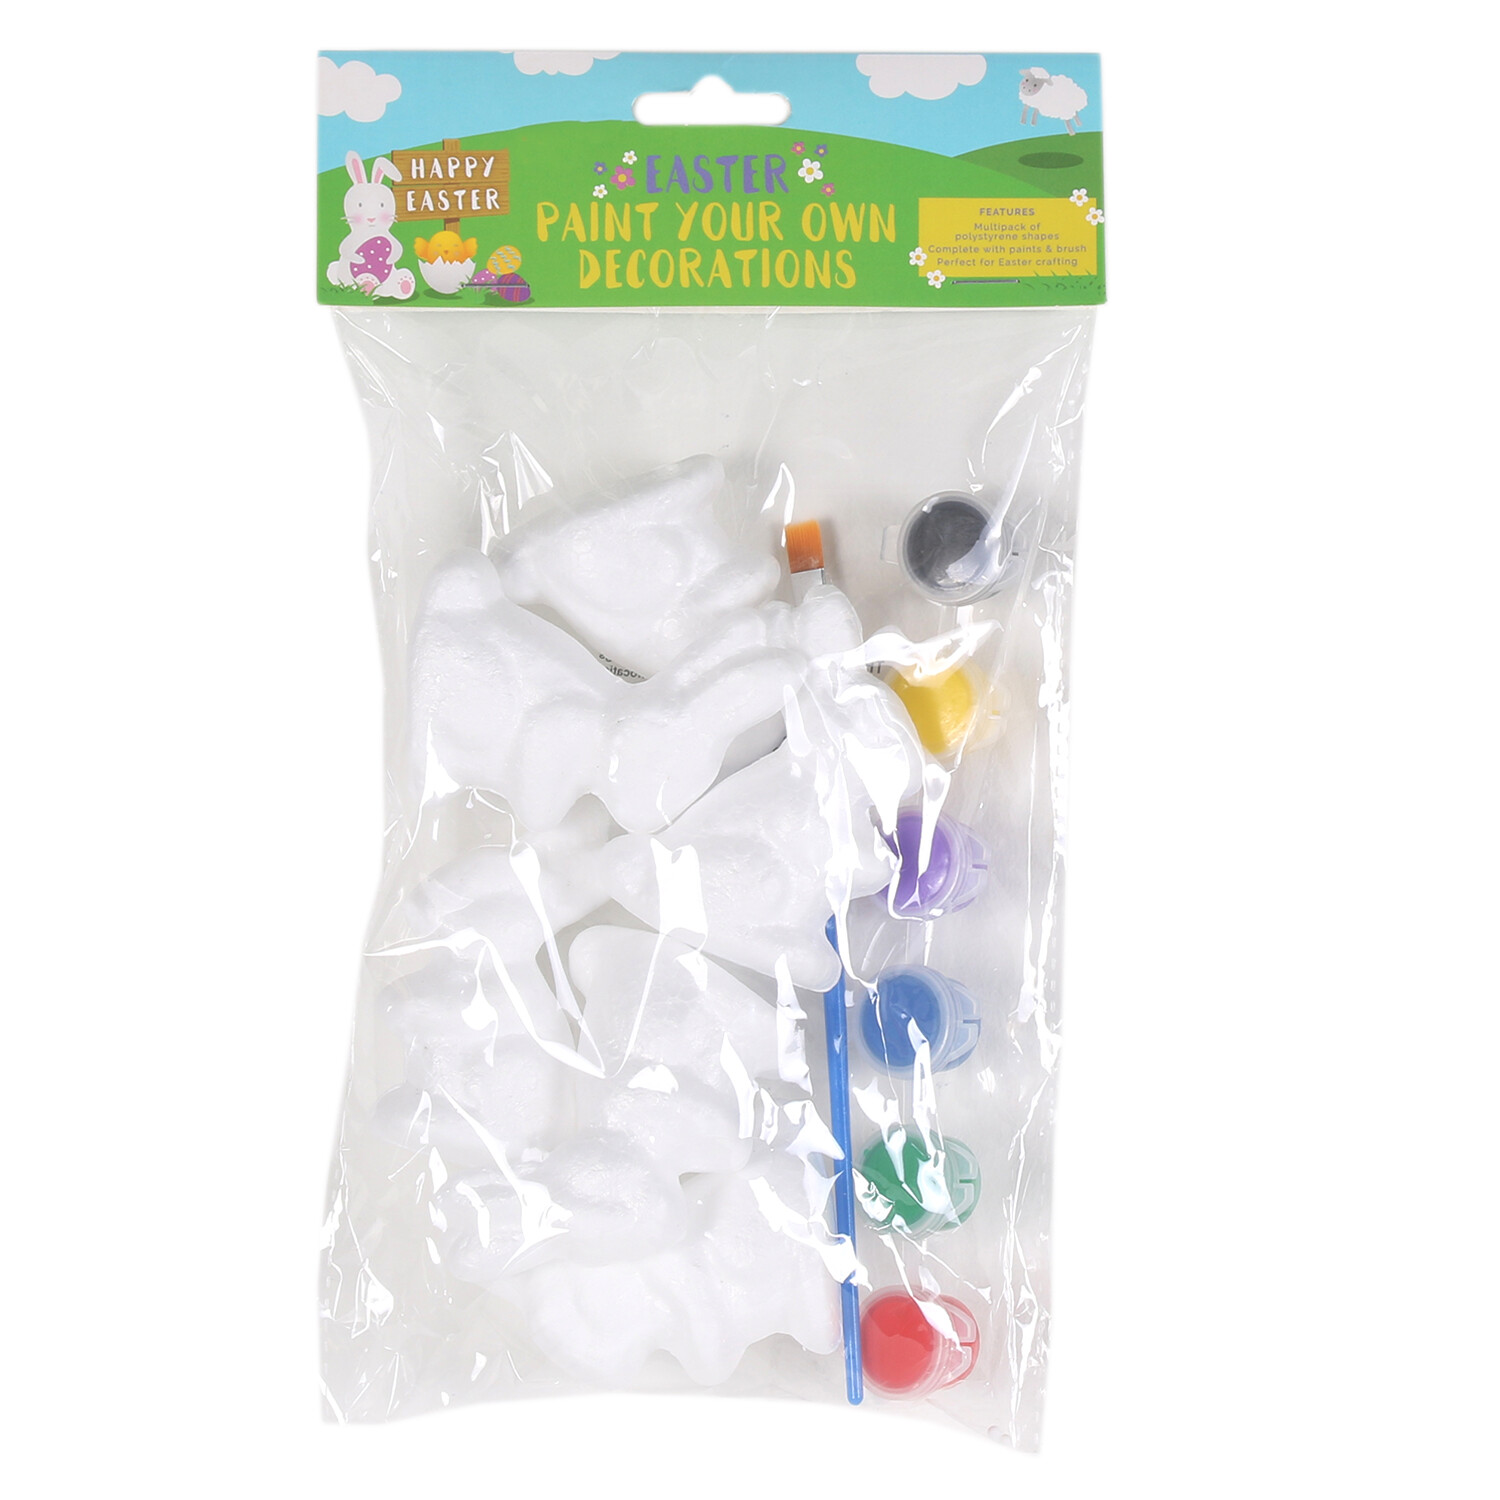 Single Easter Paint Your Own Decorations Kit in Assorted styles Image